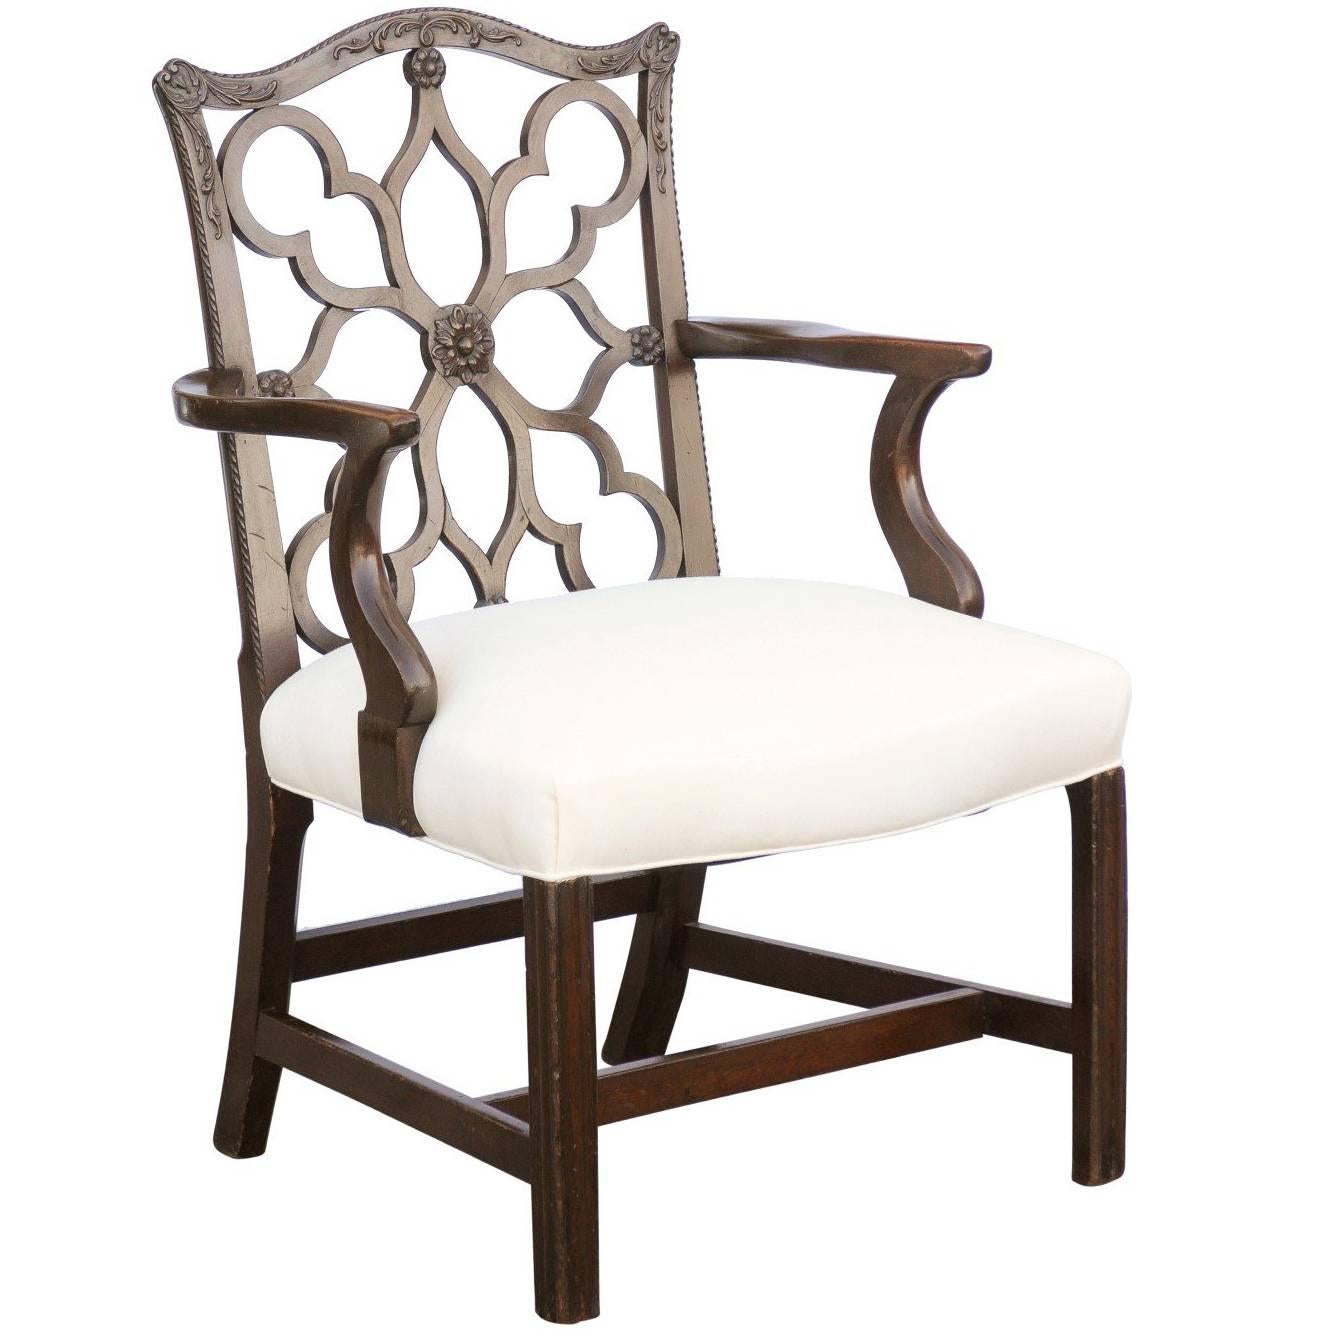 English Gothic Chippendale Style Mahogany Armchair from the Turn of the Century